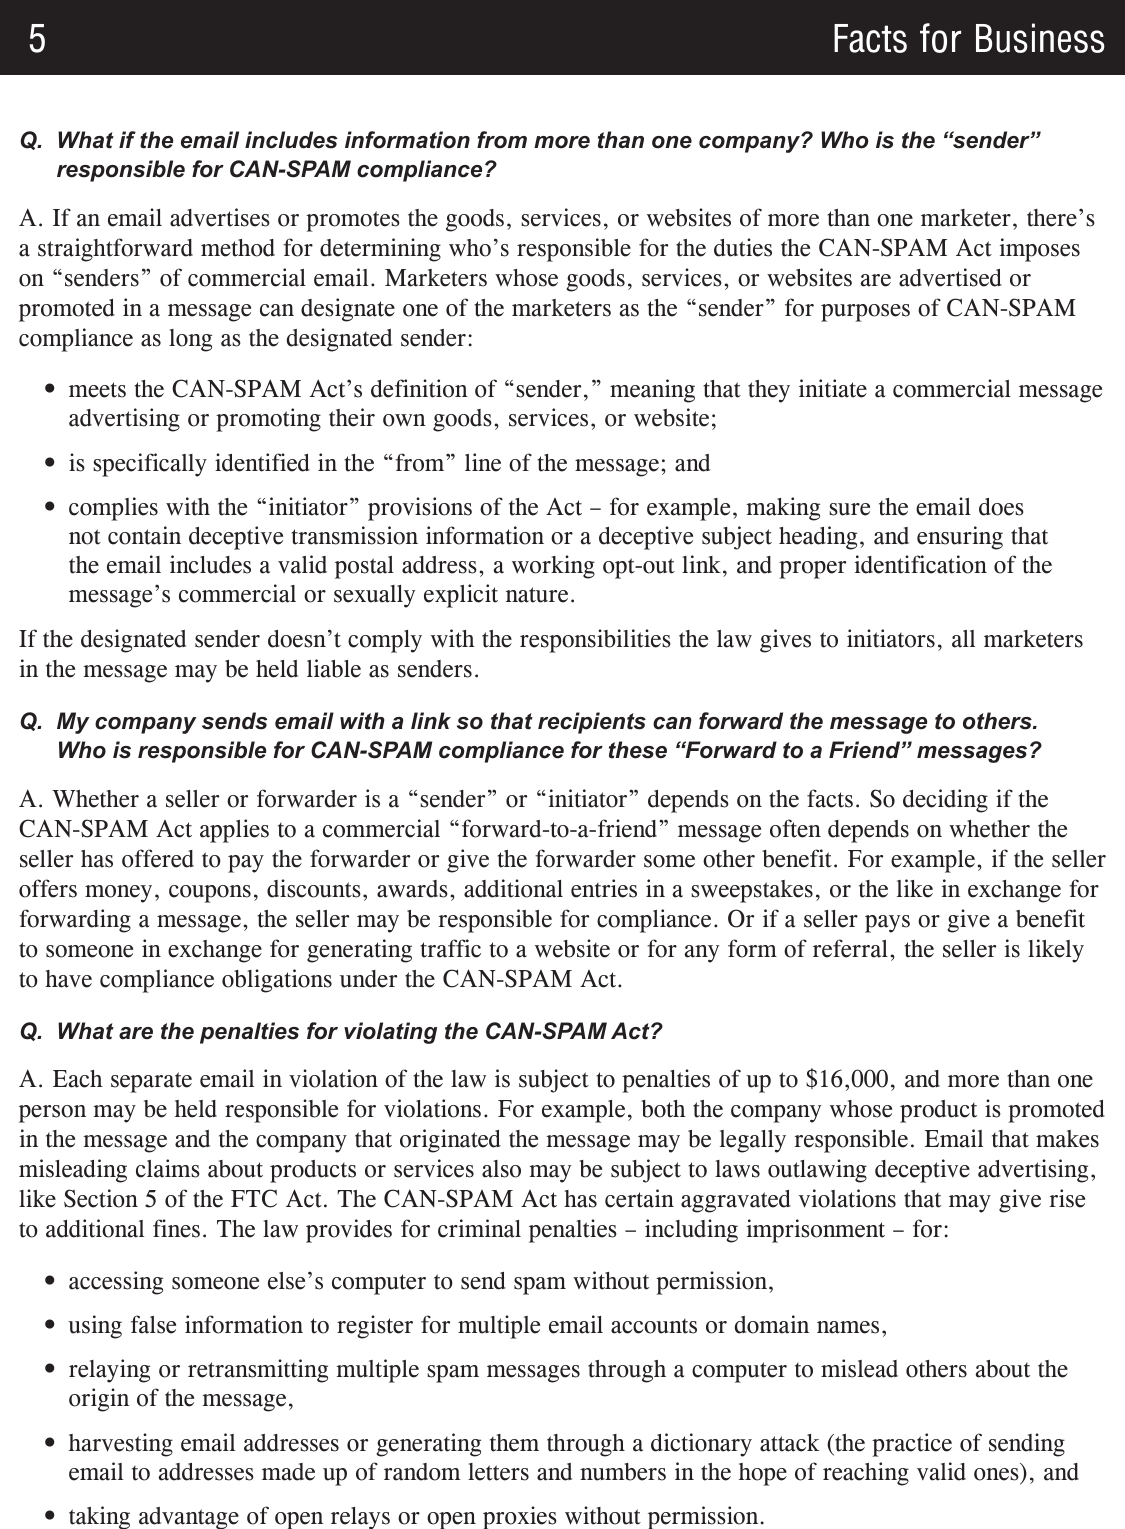 Page 5 of 6 - The CAN-SPAM Act: A Compliance Guide For Business PE Bus61-can-spam-act-compliance-guide-business